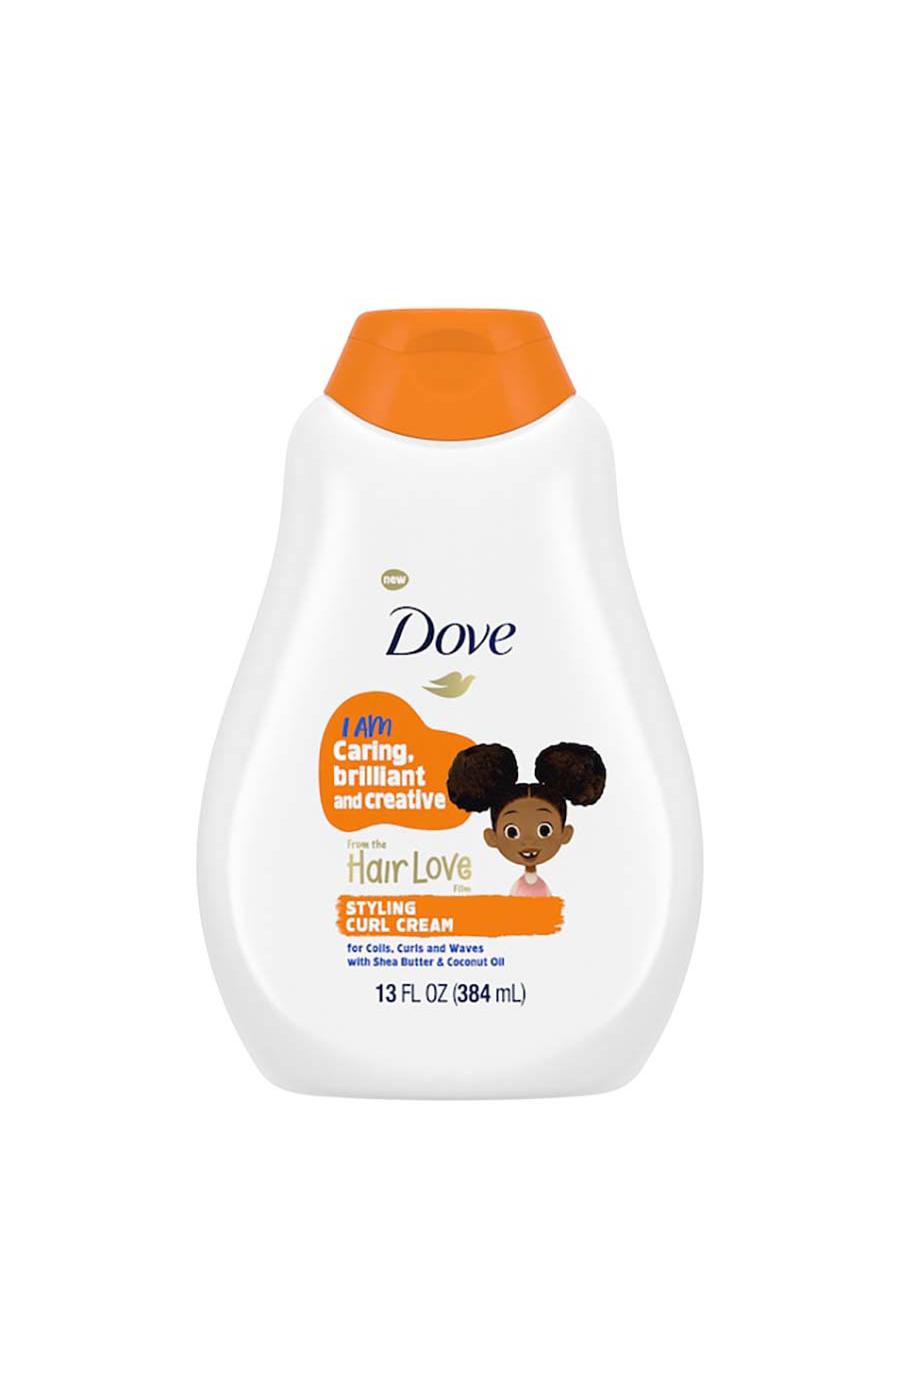 Dove Styling Curl Cream; image 1 of 2